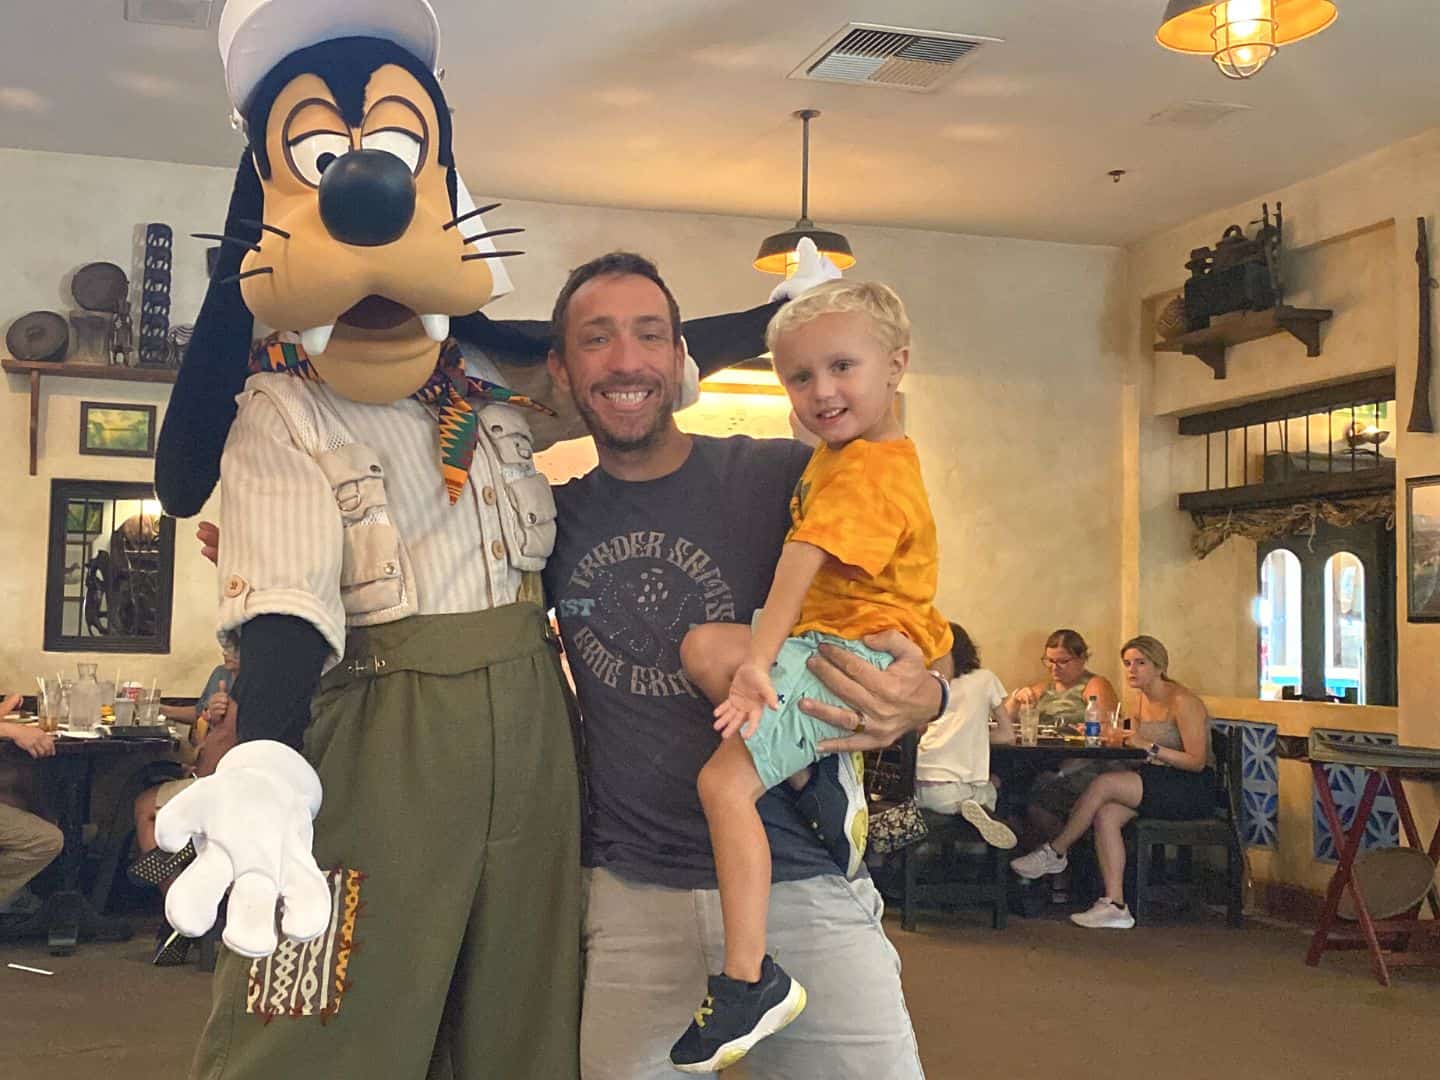 Goofy at Tusker House Character Dining Animal Kingdom poses with a dad and his son